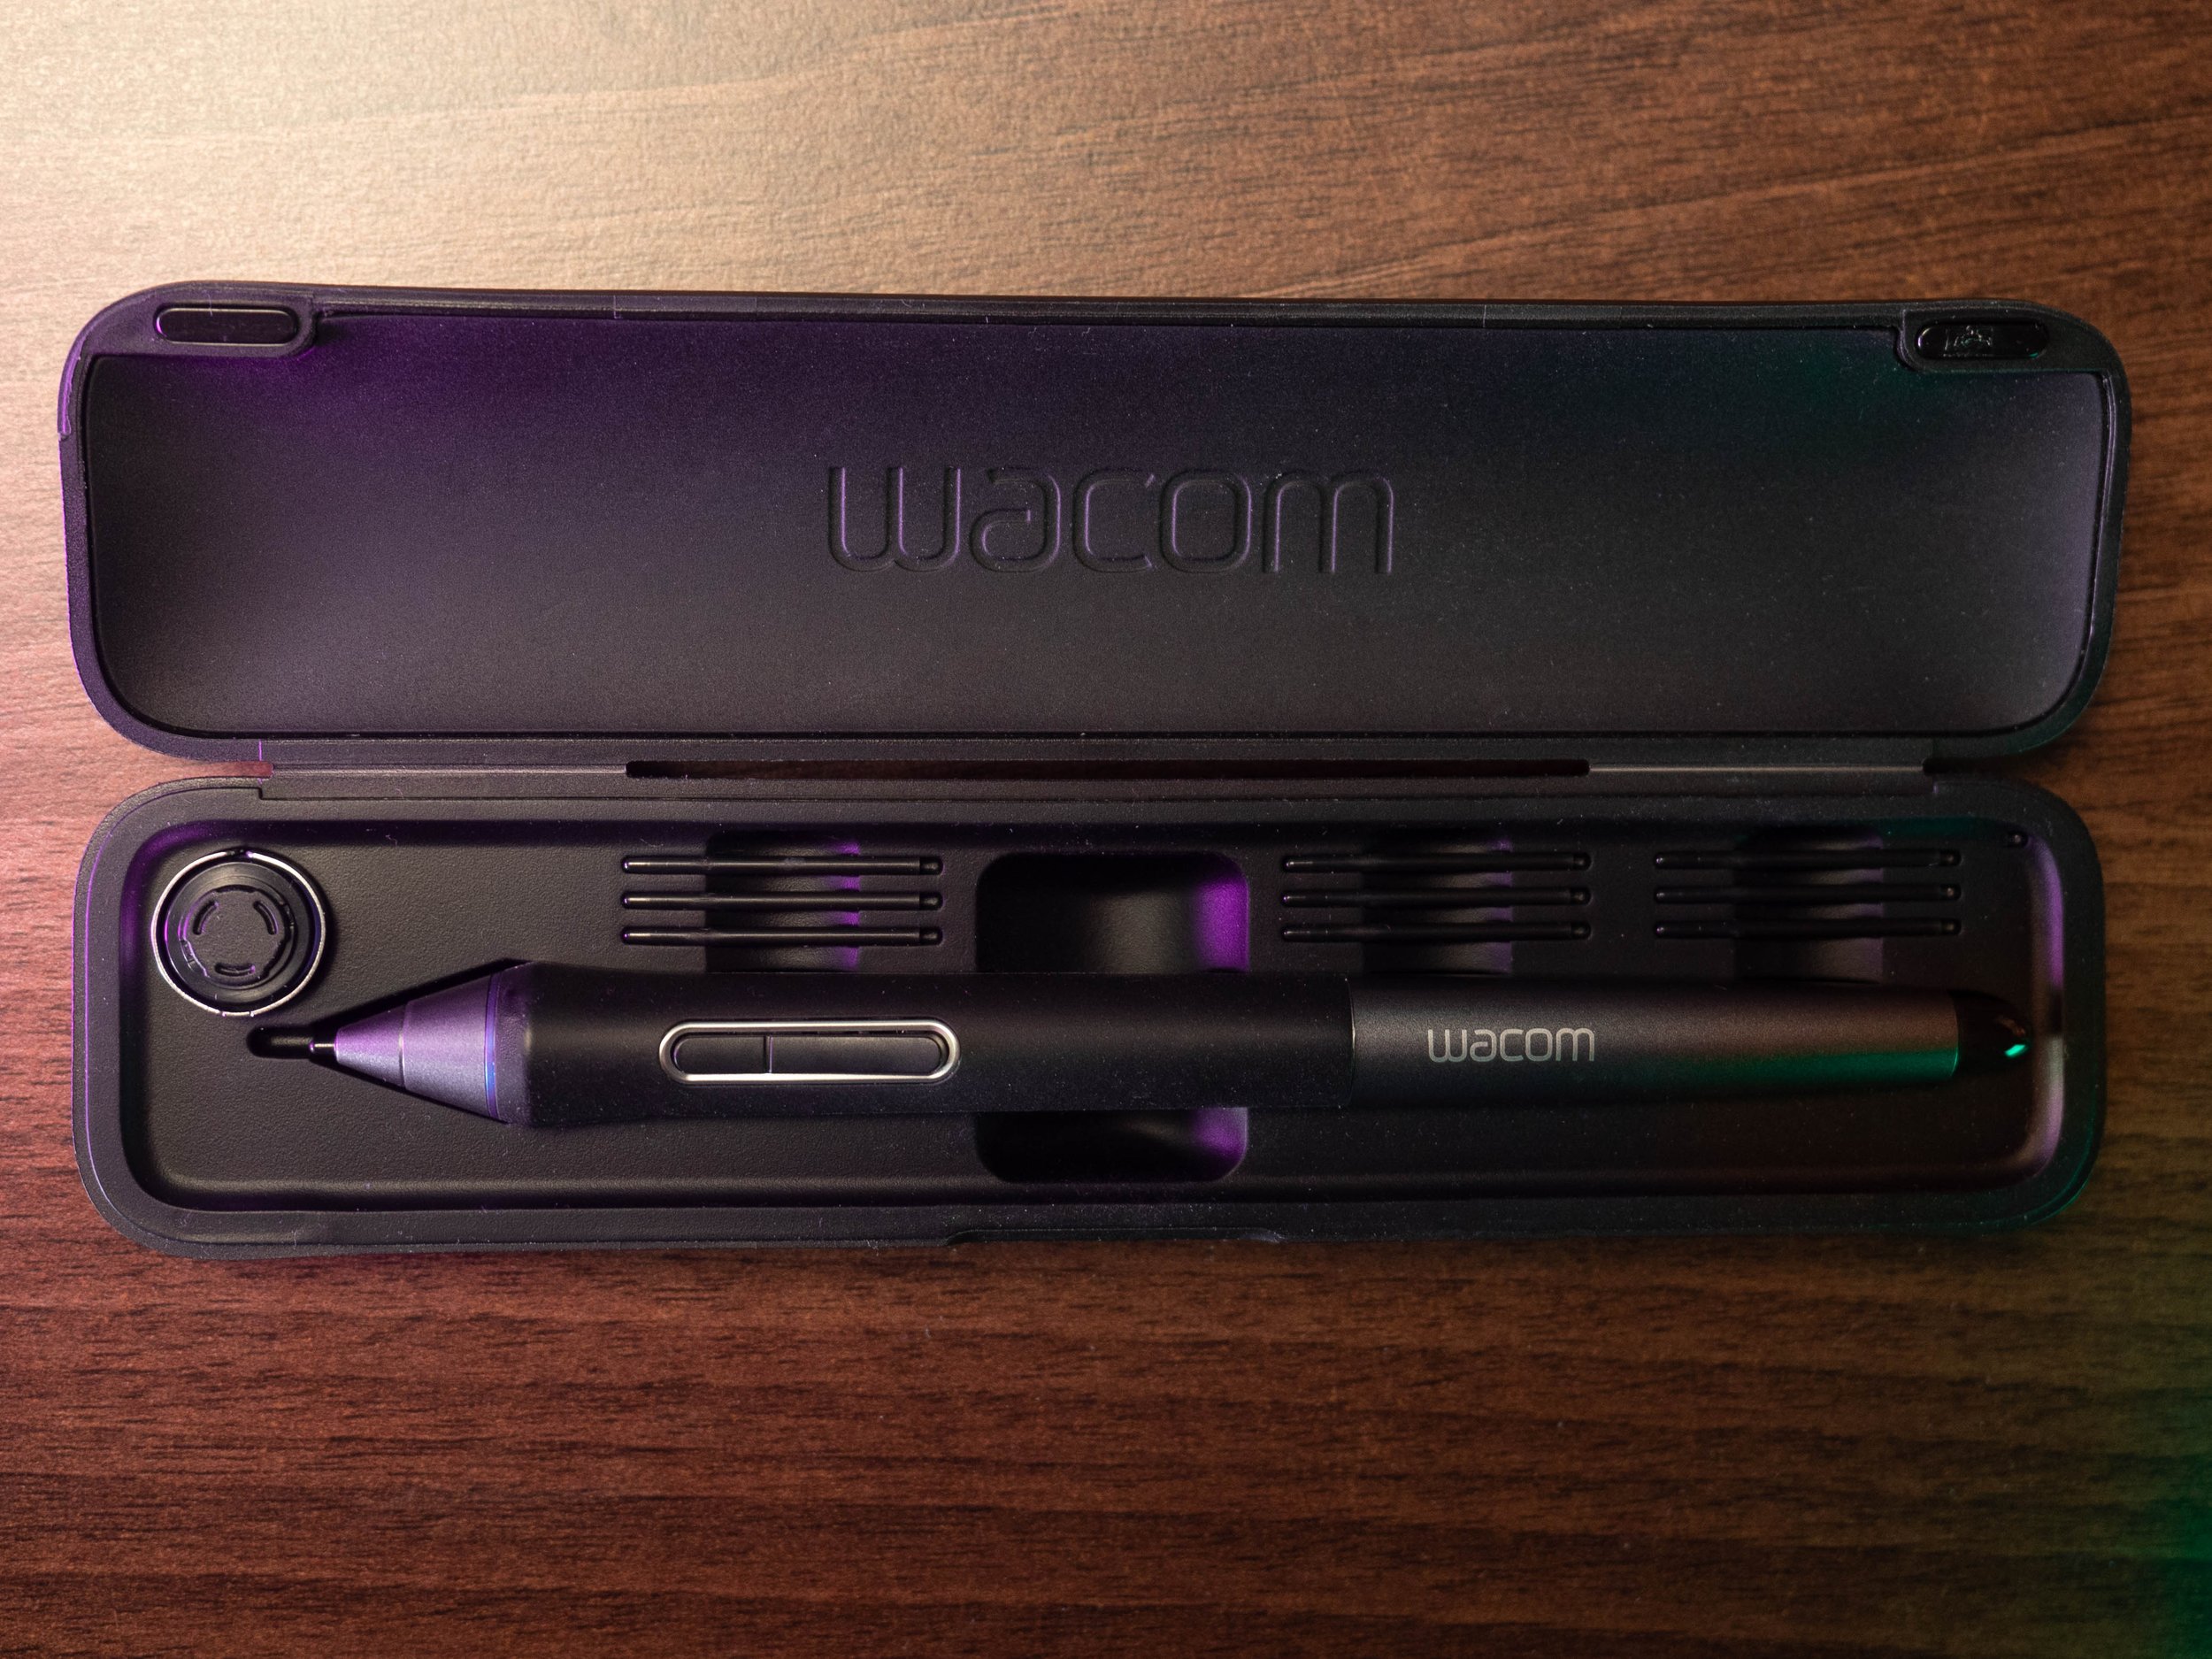  The Pro Pen 2 is excellent, as you’d expect from Wacom… and it comes in a funky little case now too! 